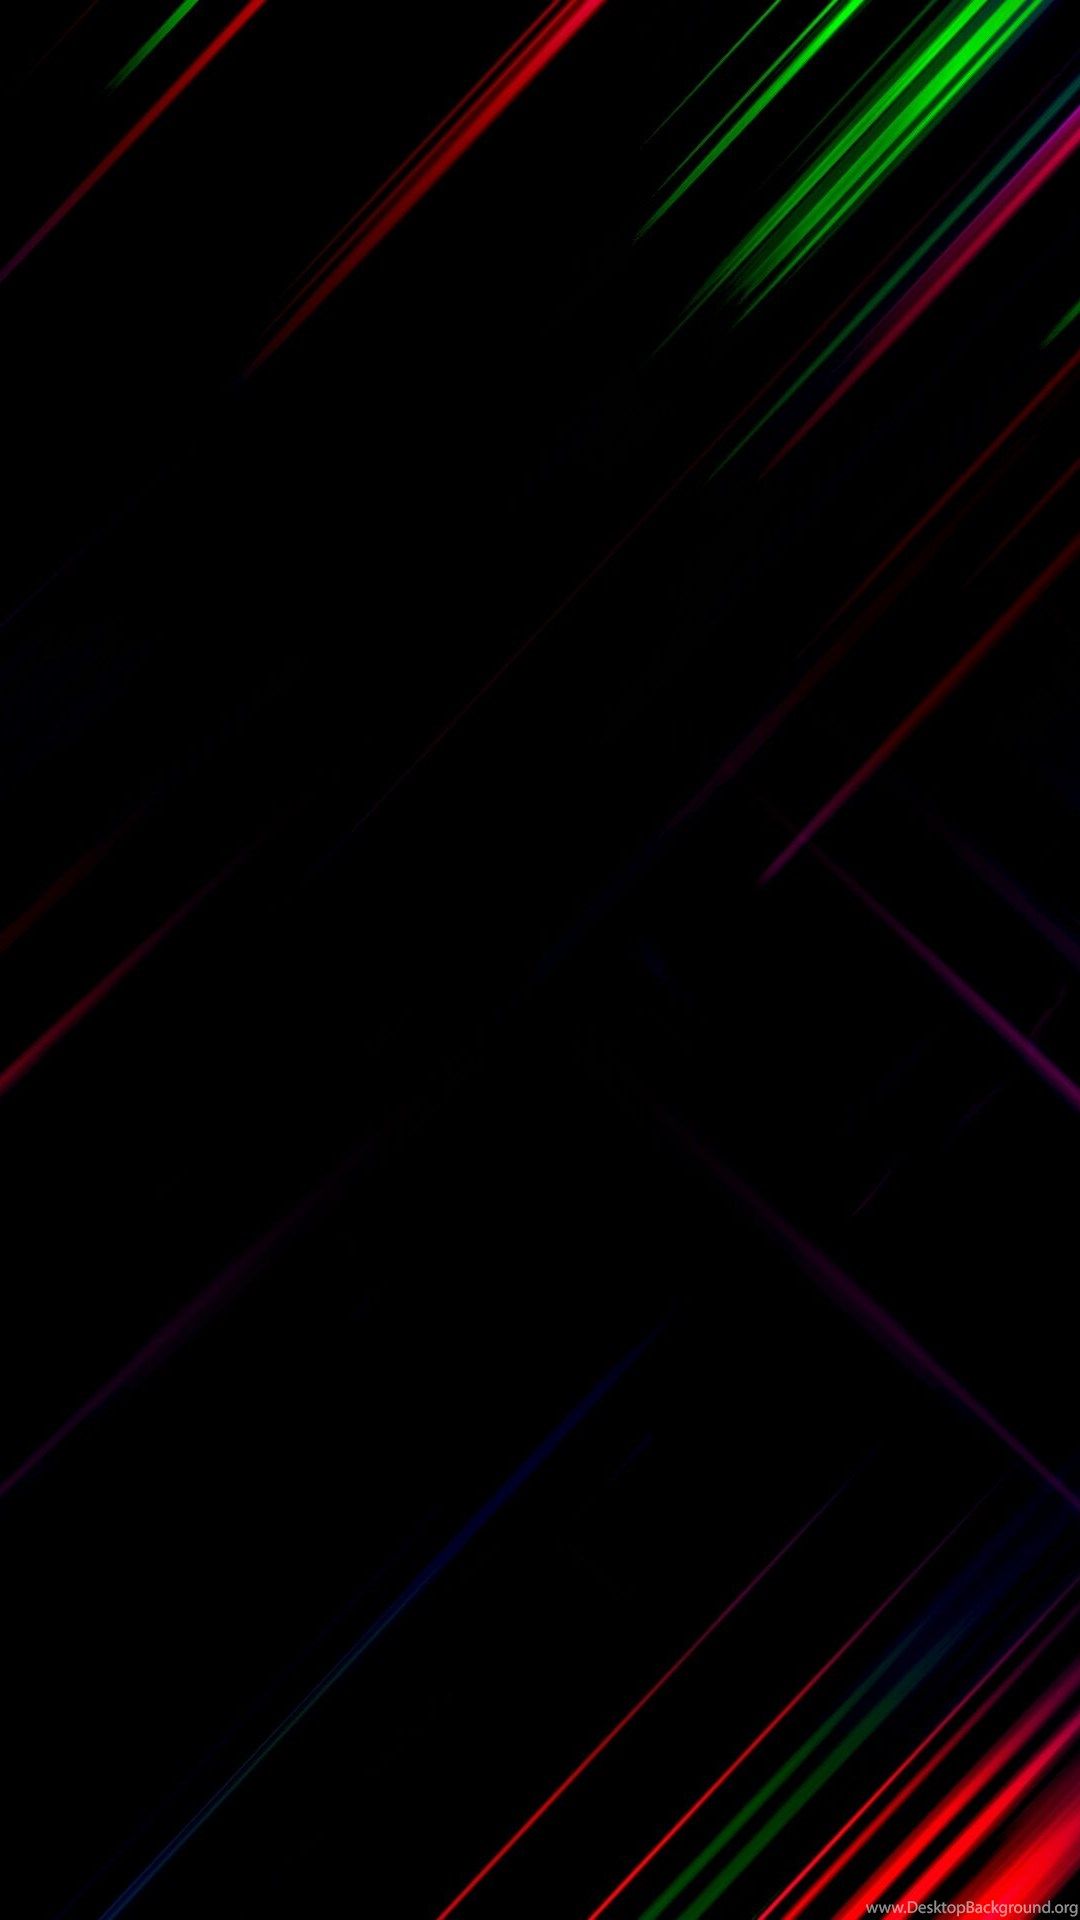 Wallpaper Perfect For Amoled Screens Desktop Background